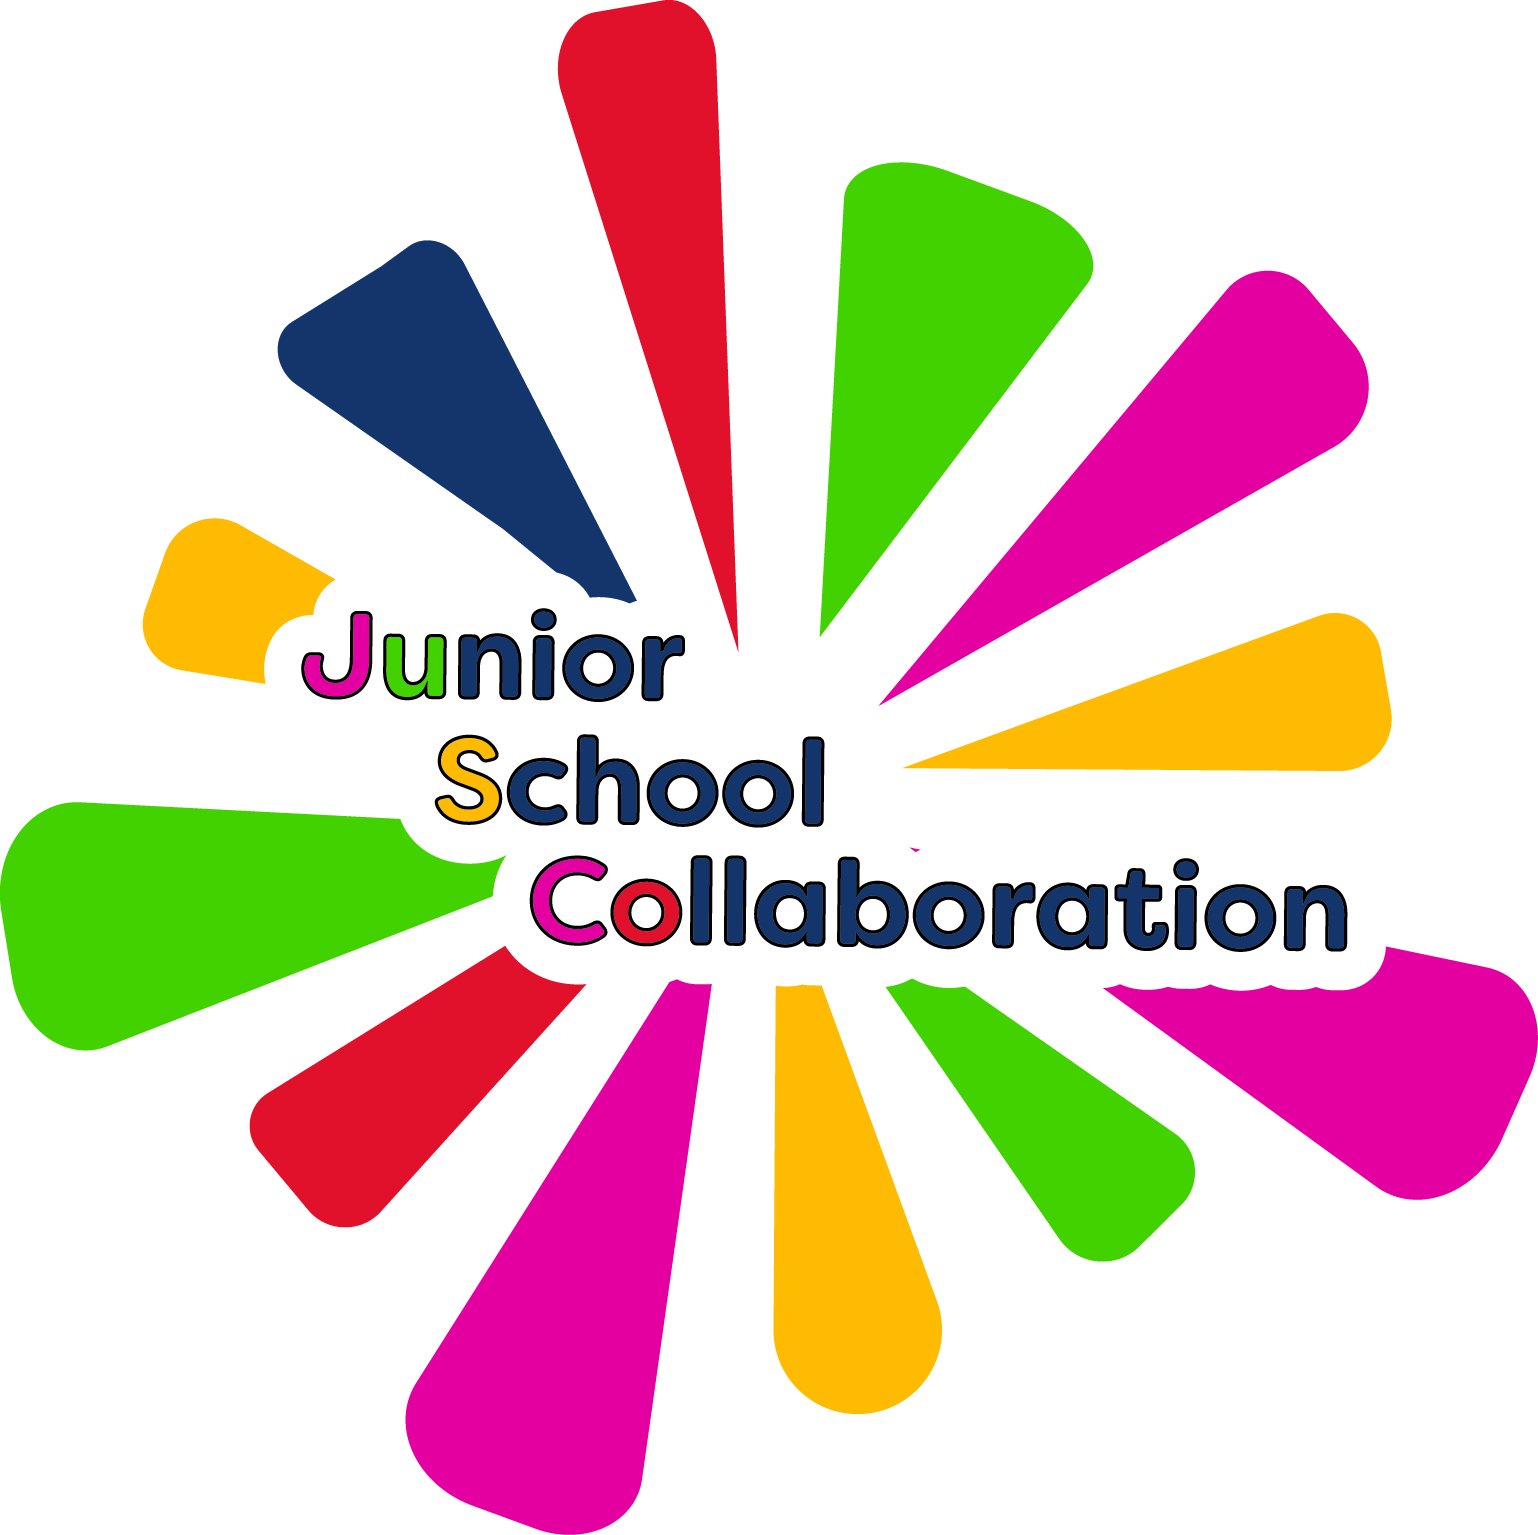 The Junior School Collaboration (JUSCO) is a group of Junior Schools working together to share ideas, challenges and solutions. #jusco https://t.co/TuslOcLmtd